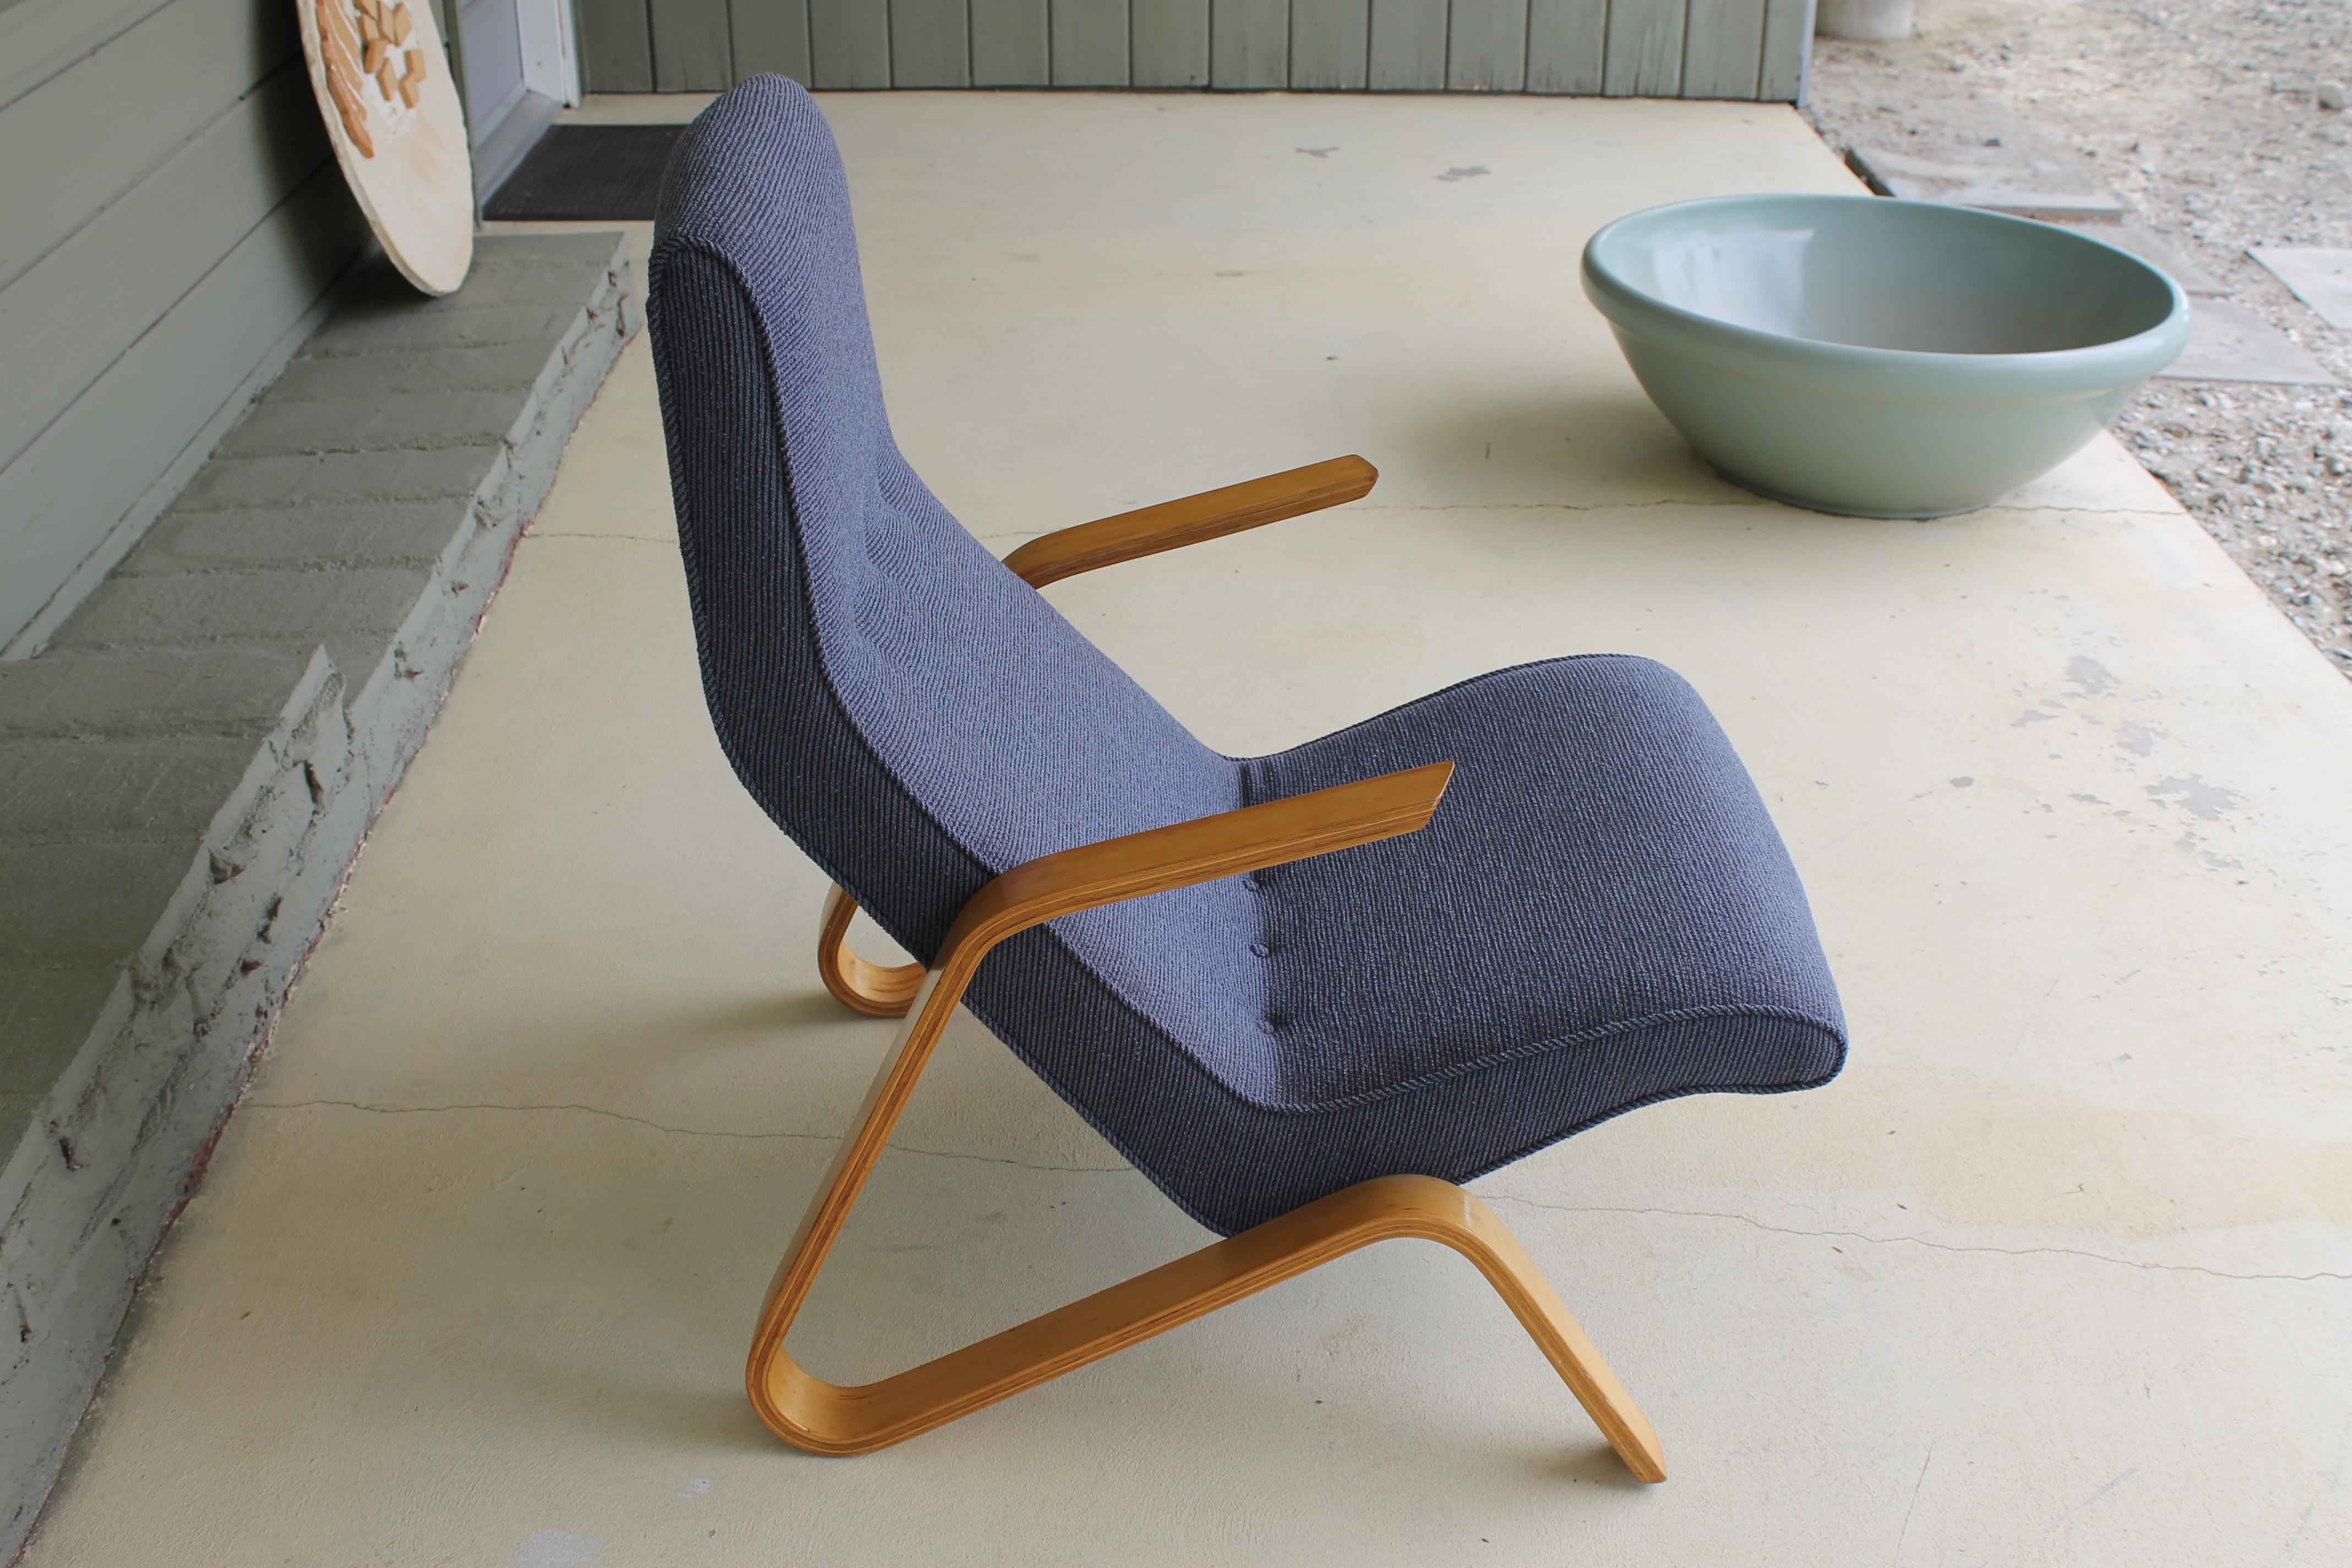 Eero Saarinen grasshopper lounge chair for Knoll. This was Saarinen's first chair for Knoll in the 1940s. It remained in the Knoll collection until 1965. Measures 29.5